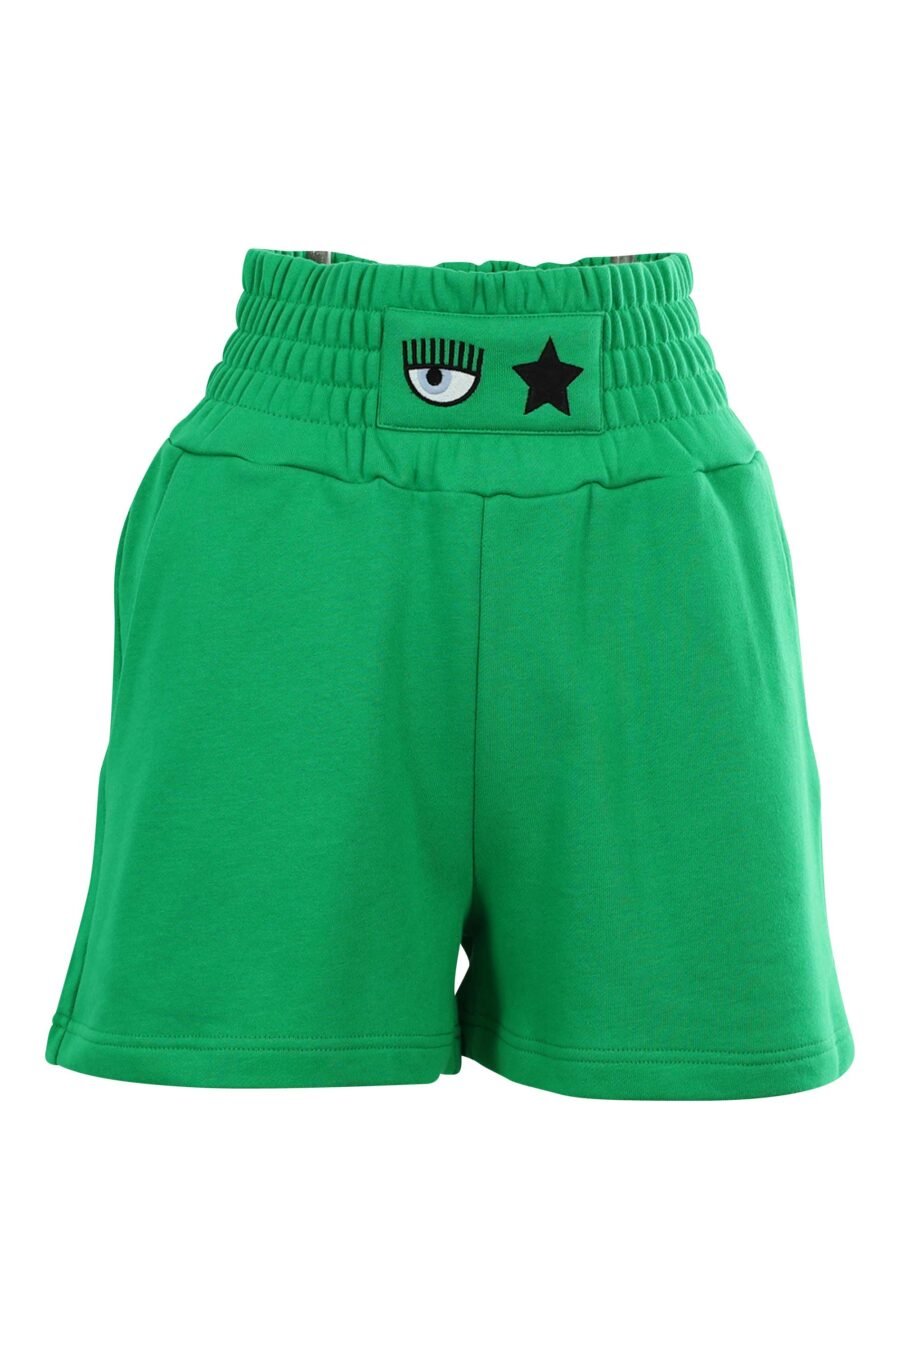 Tracksuit bottoms green shorts with eye and star logo - 8052672415479